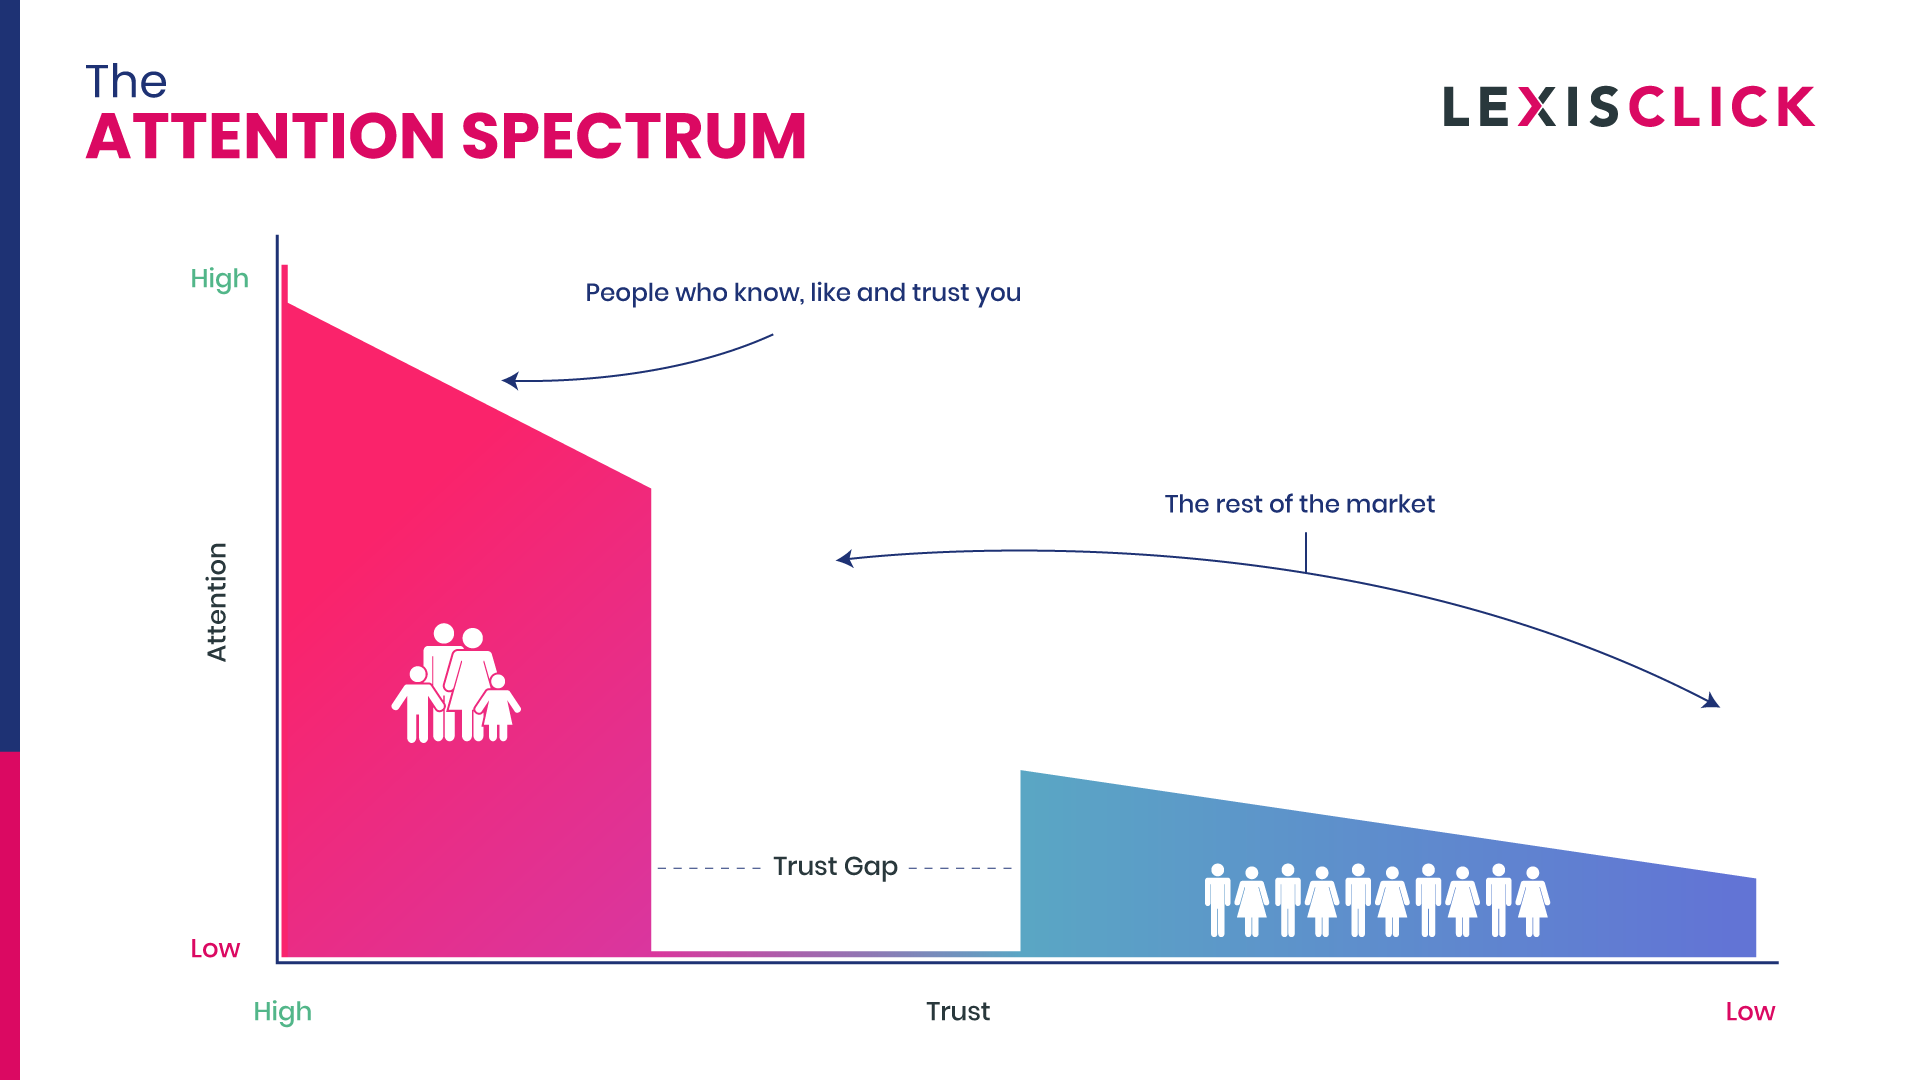 The Attention Spectrum by Lexisclick